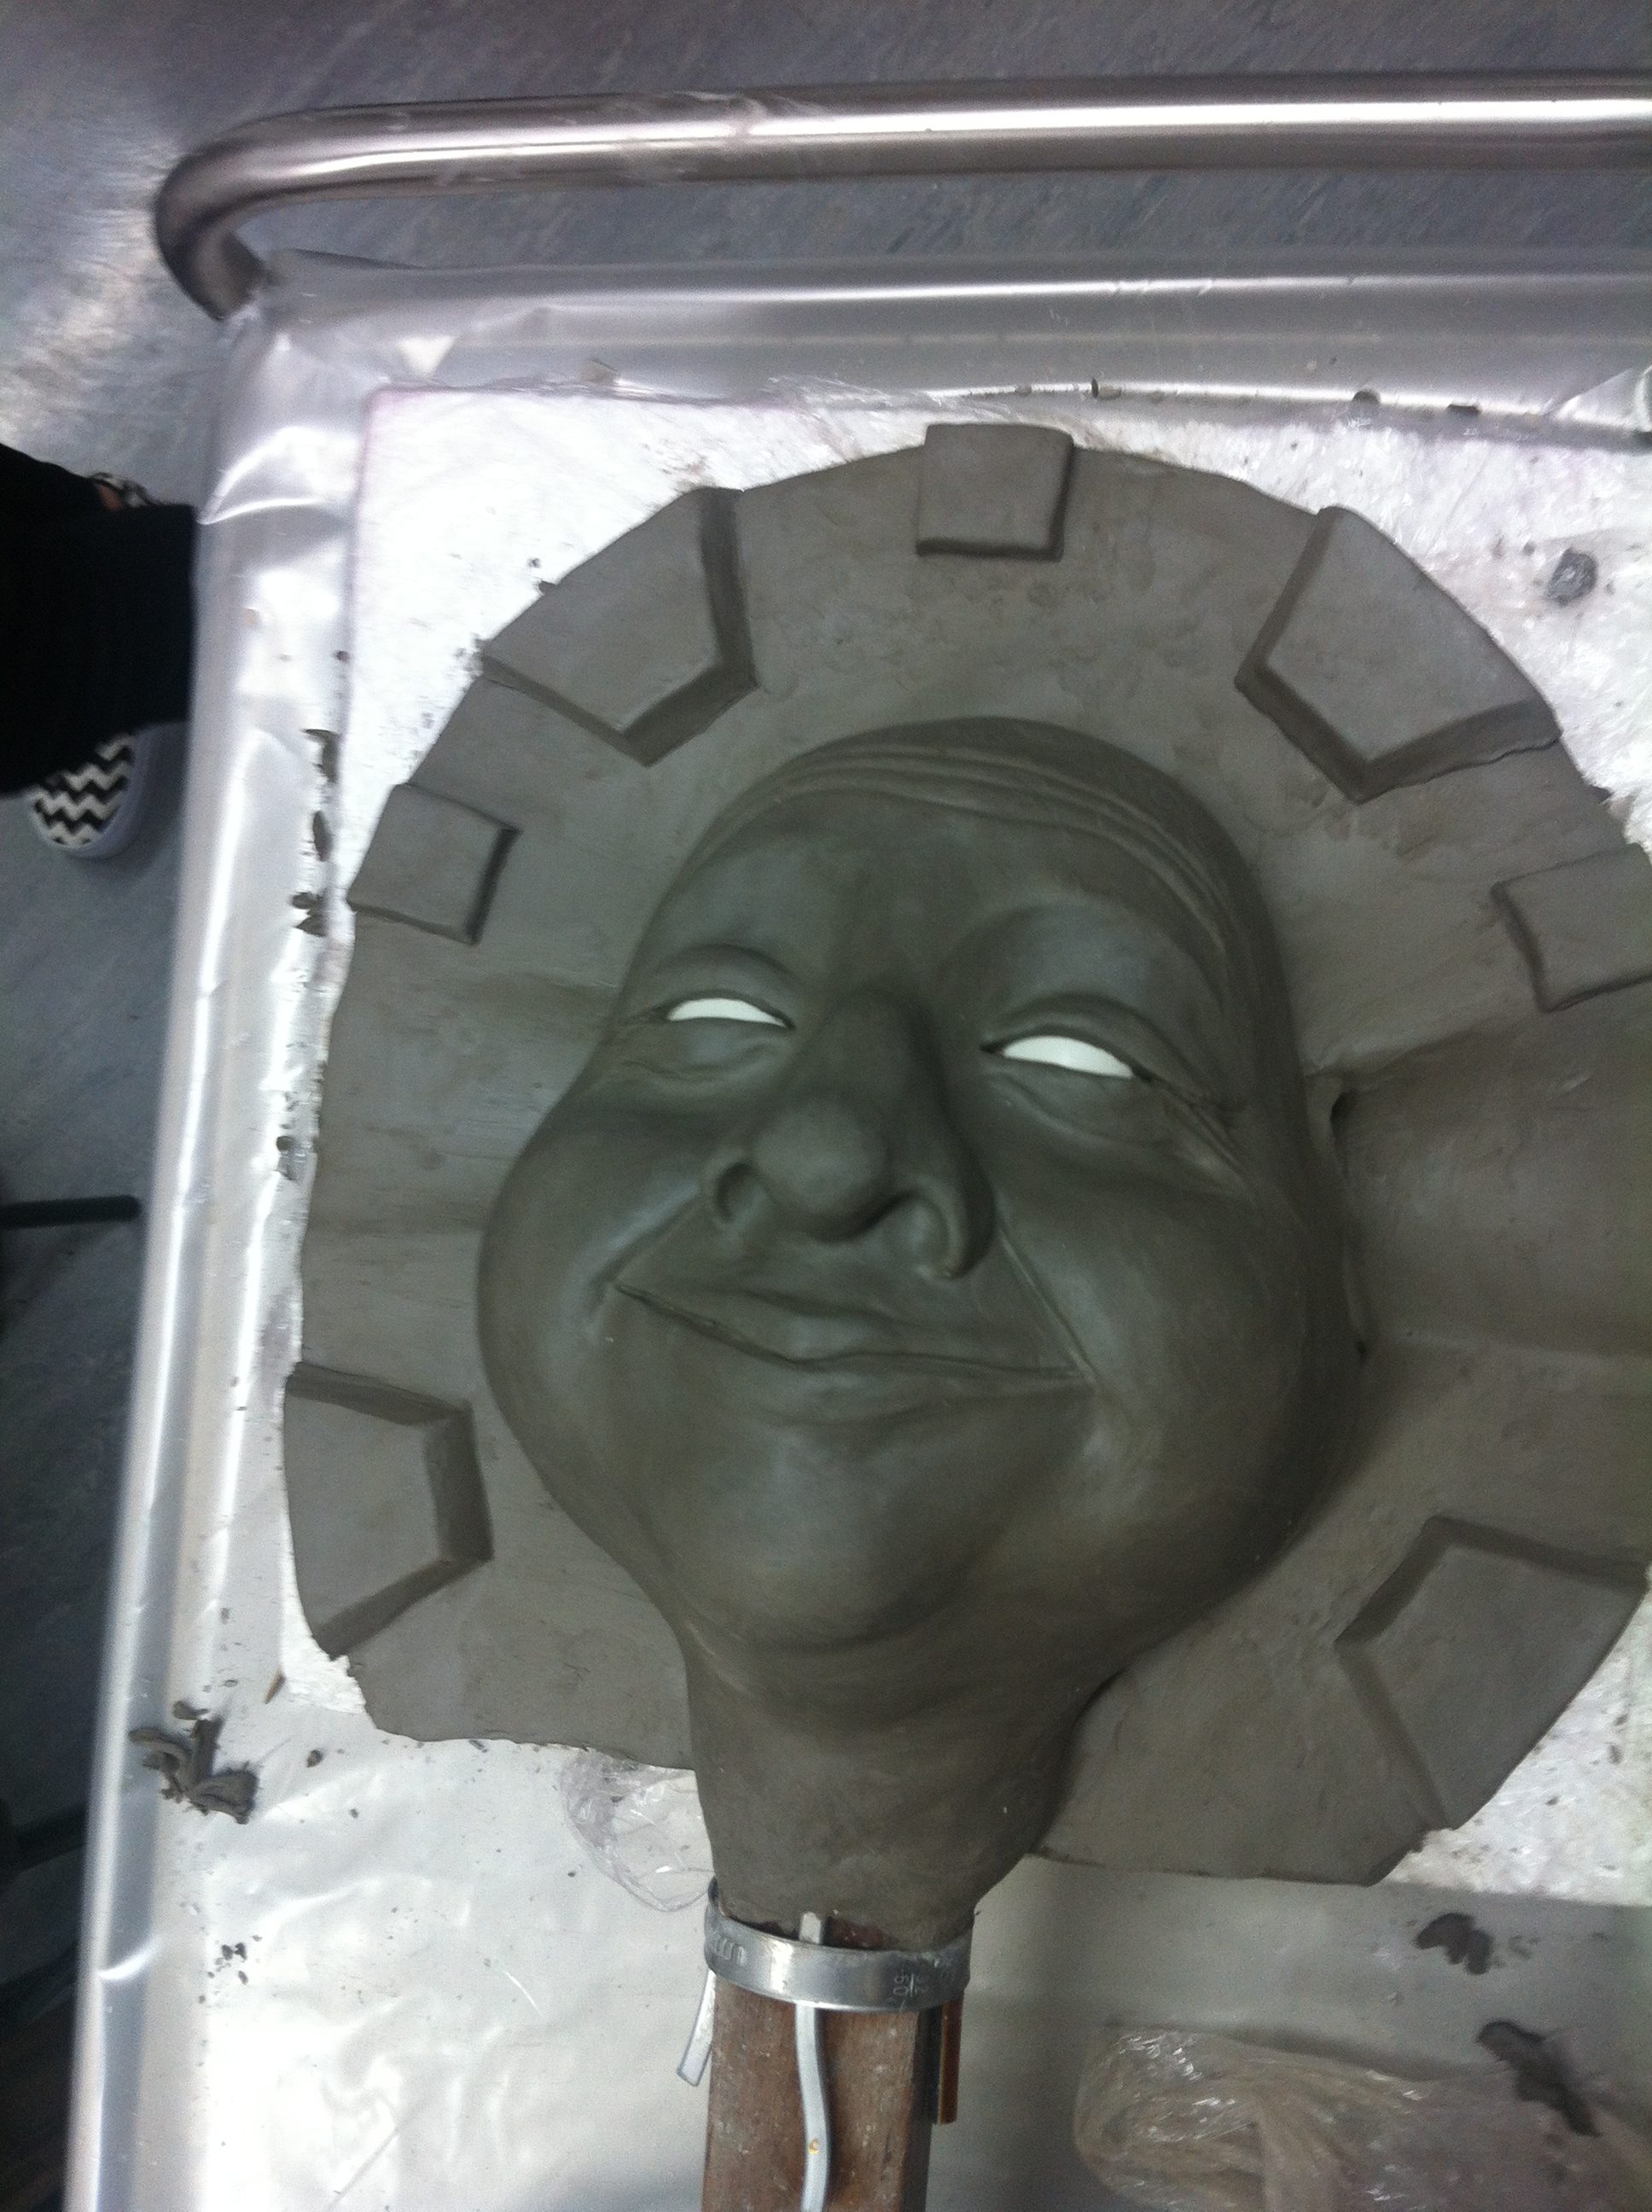 Plaster mould making process for latex puppet head